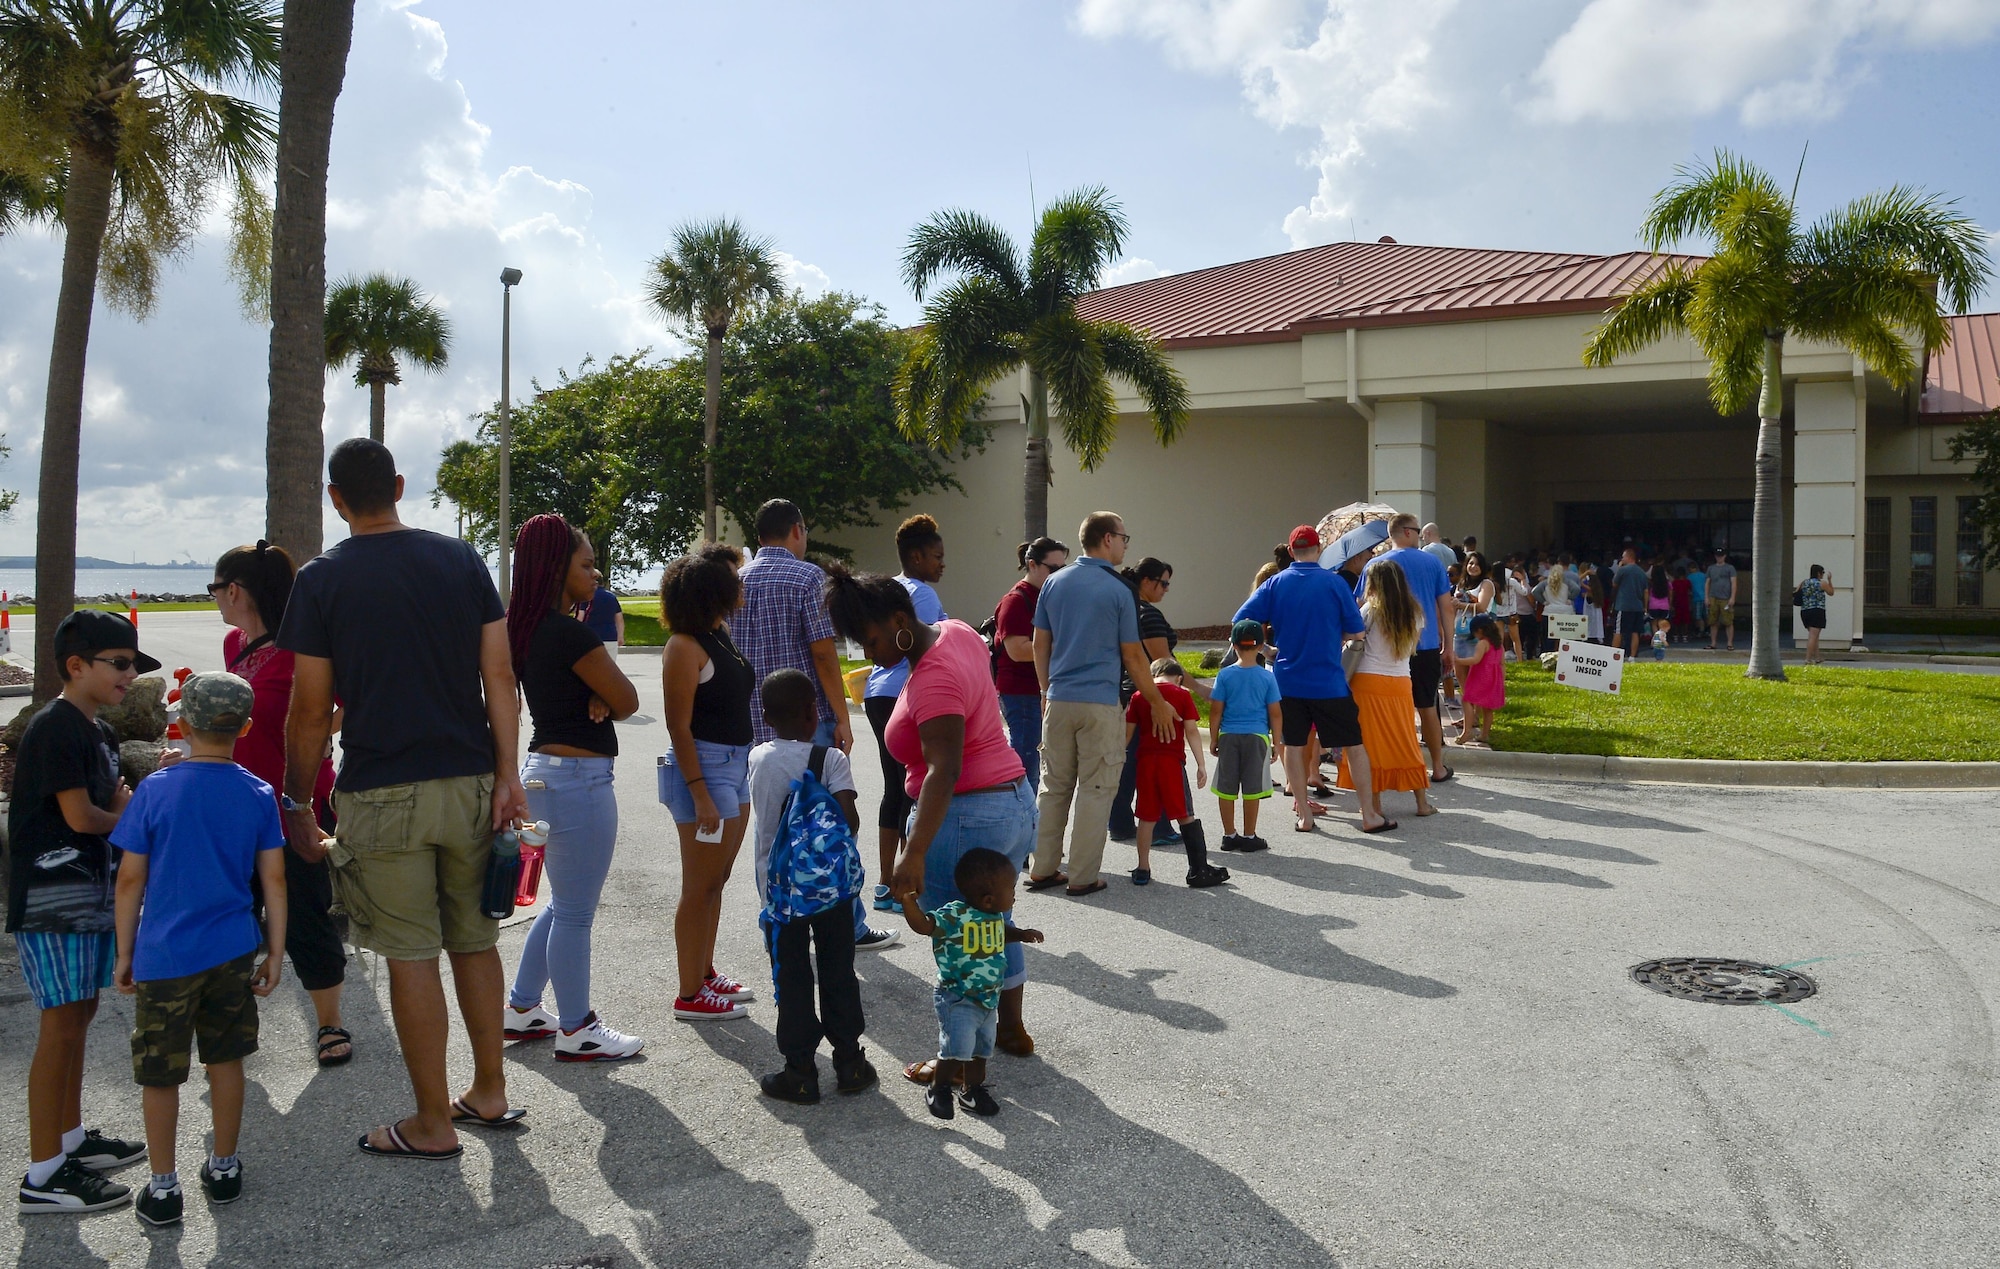 Families line up to receive school supplies and resources during the Back to School Fair at MacDill Air Force Base, Fla., July 30, 2016. The fair is a base-wide, annual event that gathered more than 2,000 military families and children this year. (U.S. Air Force photo by Staff Sgt. Shandresha Mitchell)